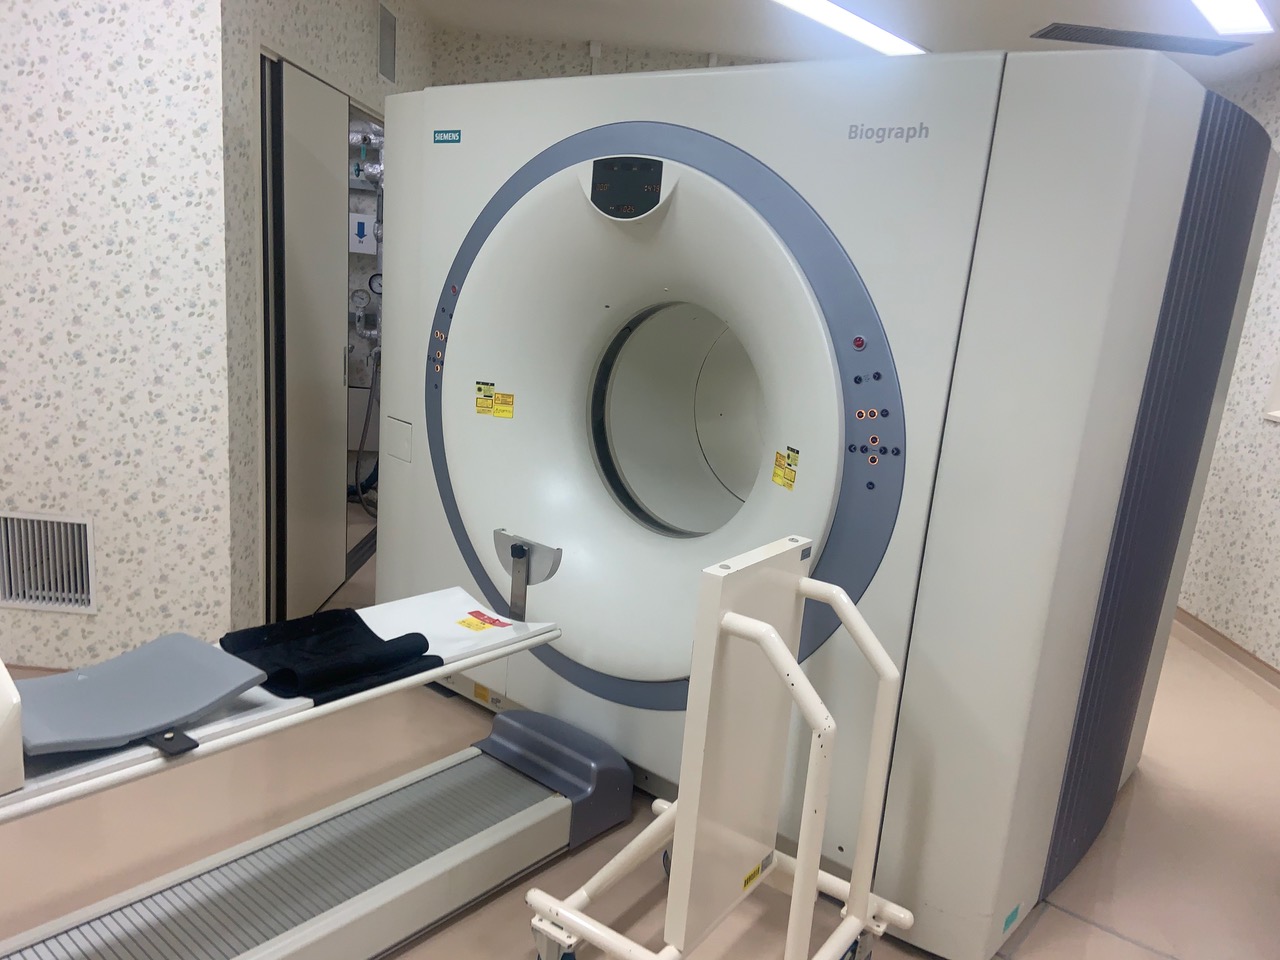 Used Siemens Biograph 16 PET CT for sale (ID 1049) | 20Med